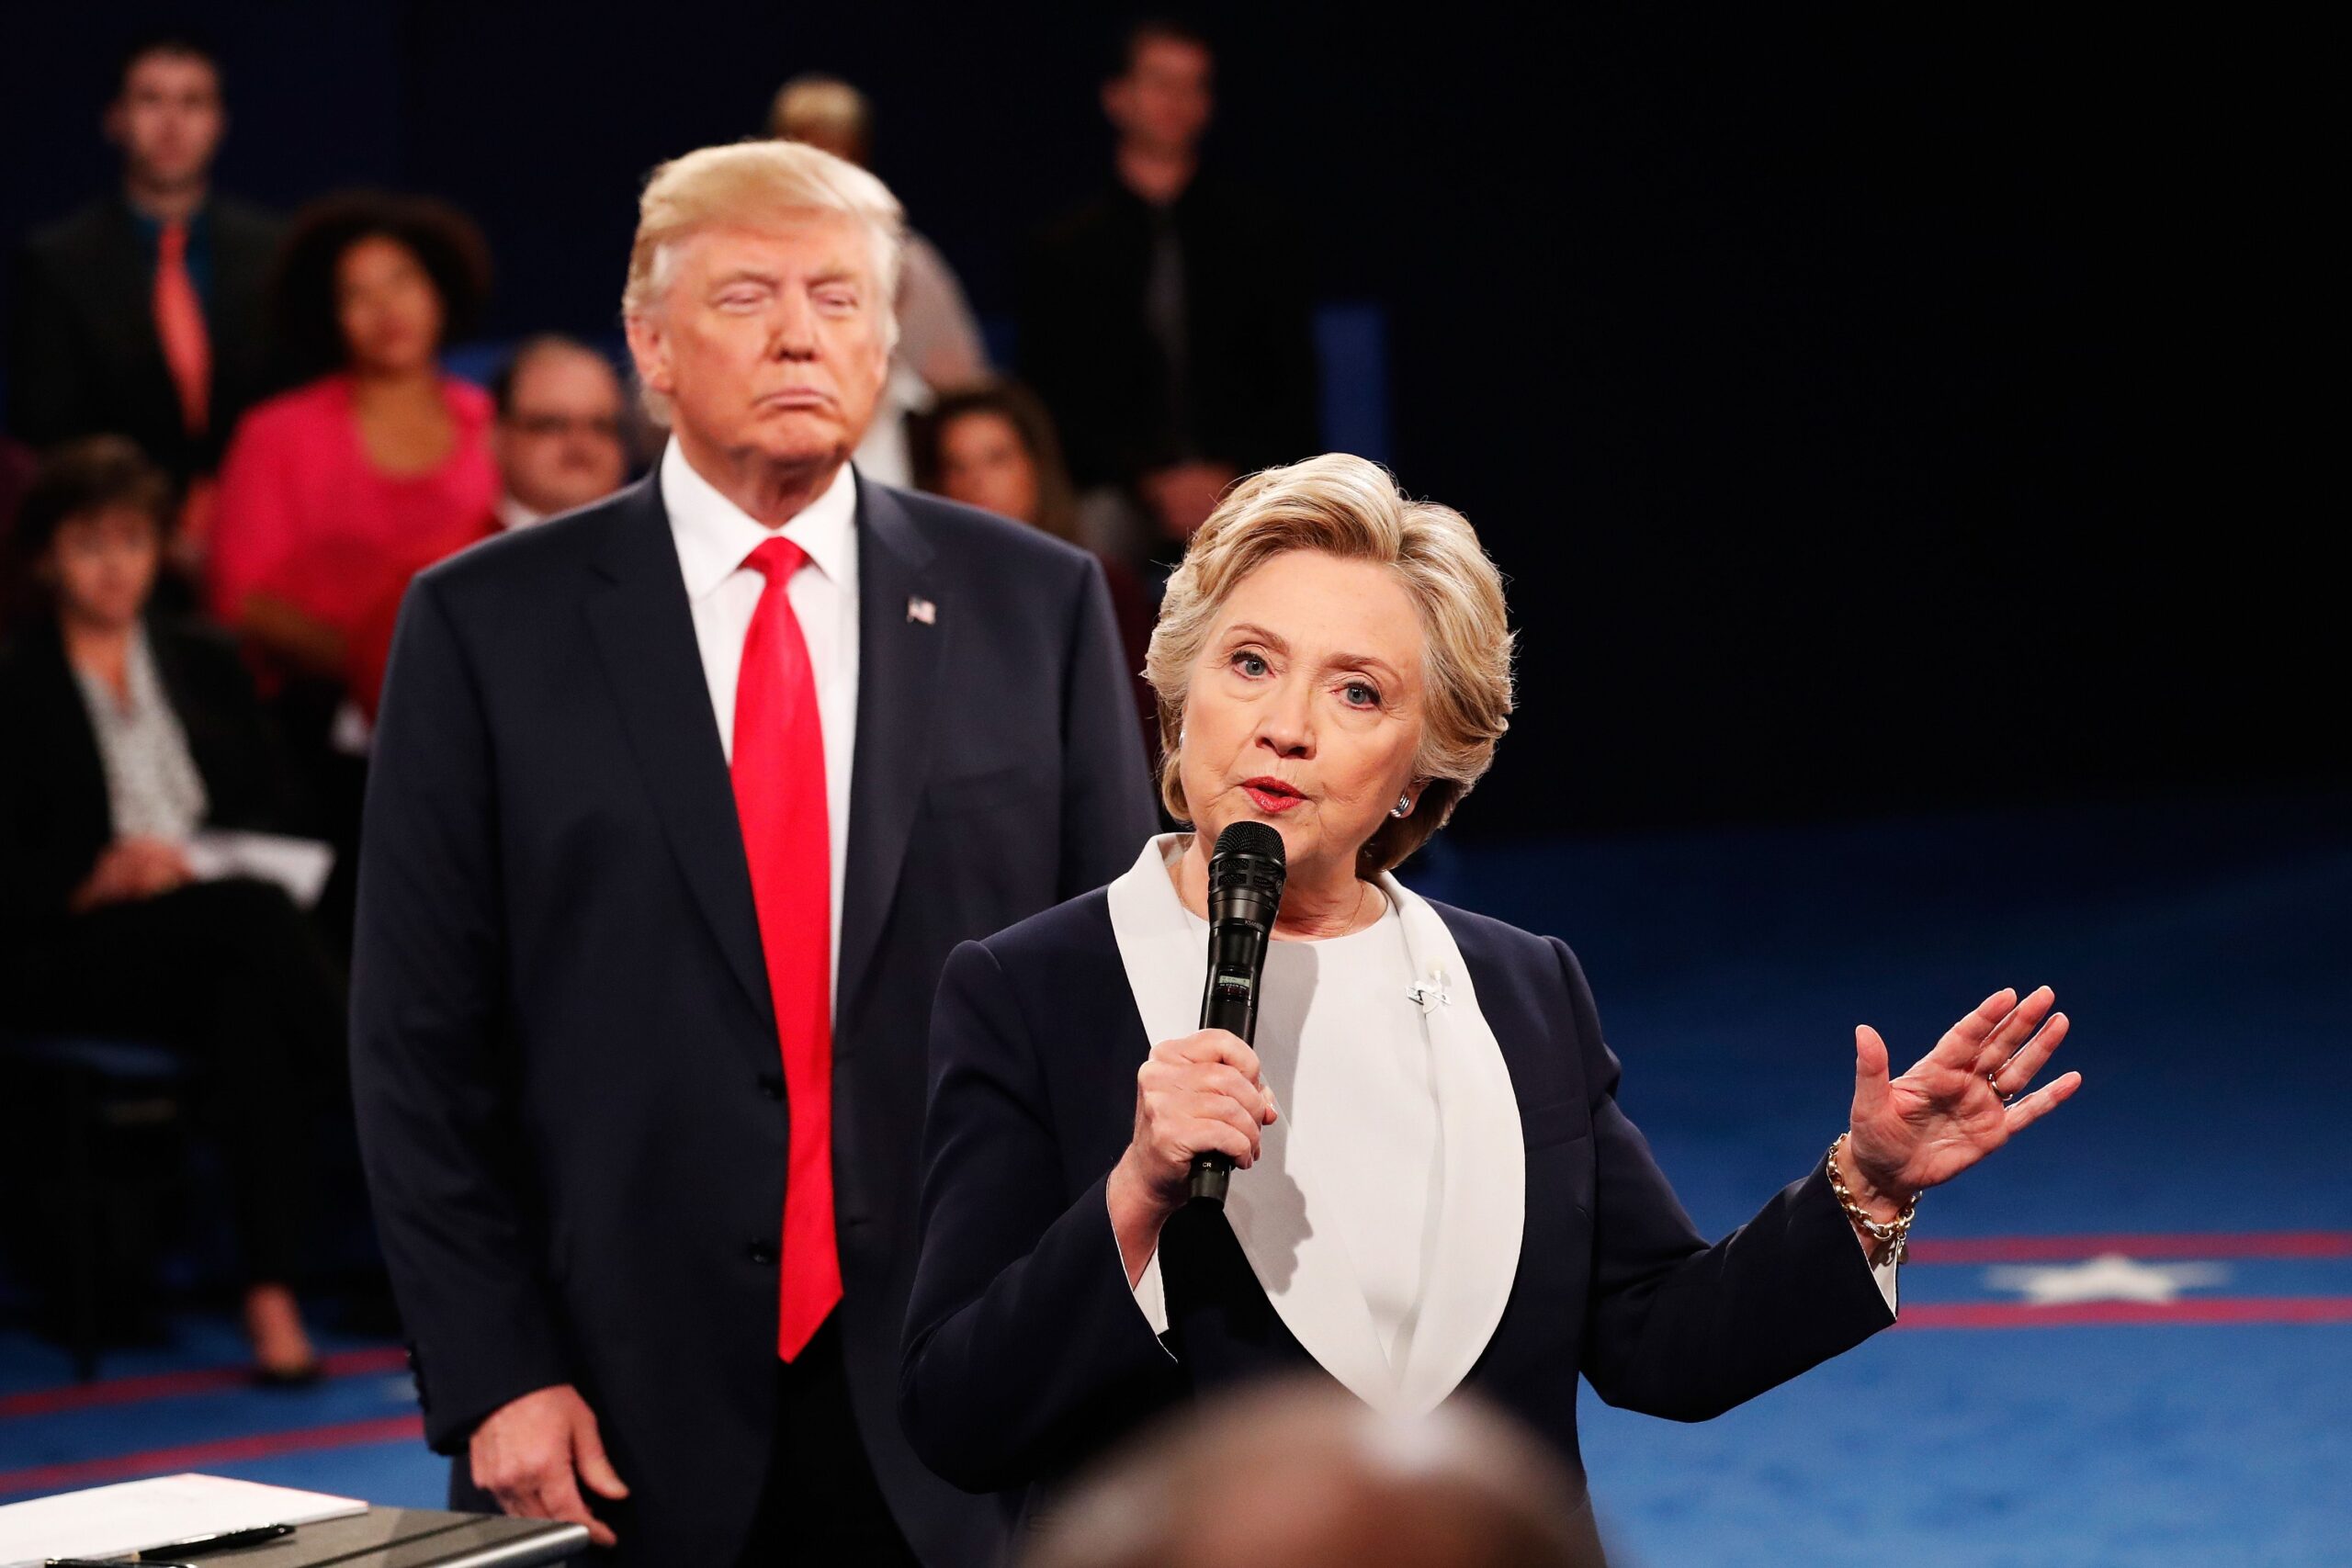 The 2016 presidential debate between Hillary Clinton and Donald Trump shattered viewership records. Approximately 84 million people tuned in to watch the candidates spar on topics ranging from immigration to foreign policy. The intense exchanges, memorable zingers, and contrasting styles made it a must-watch event. It highlighted the power of televised debates in shaping public opinion. Interestingly, social media platforms buzzed with real-time reactions, turning the debate into a digital spectacle. :: CNN